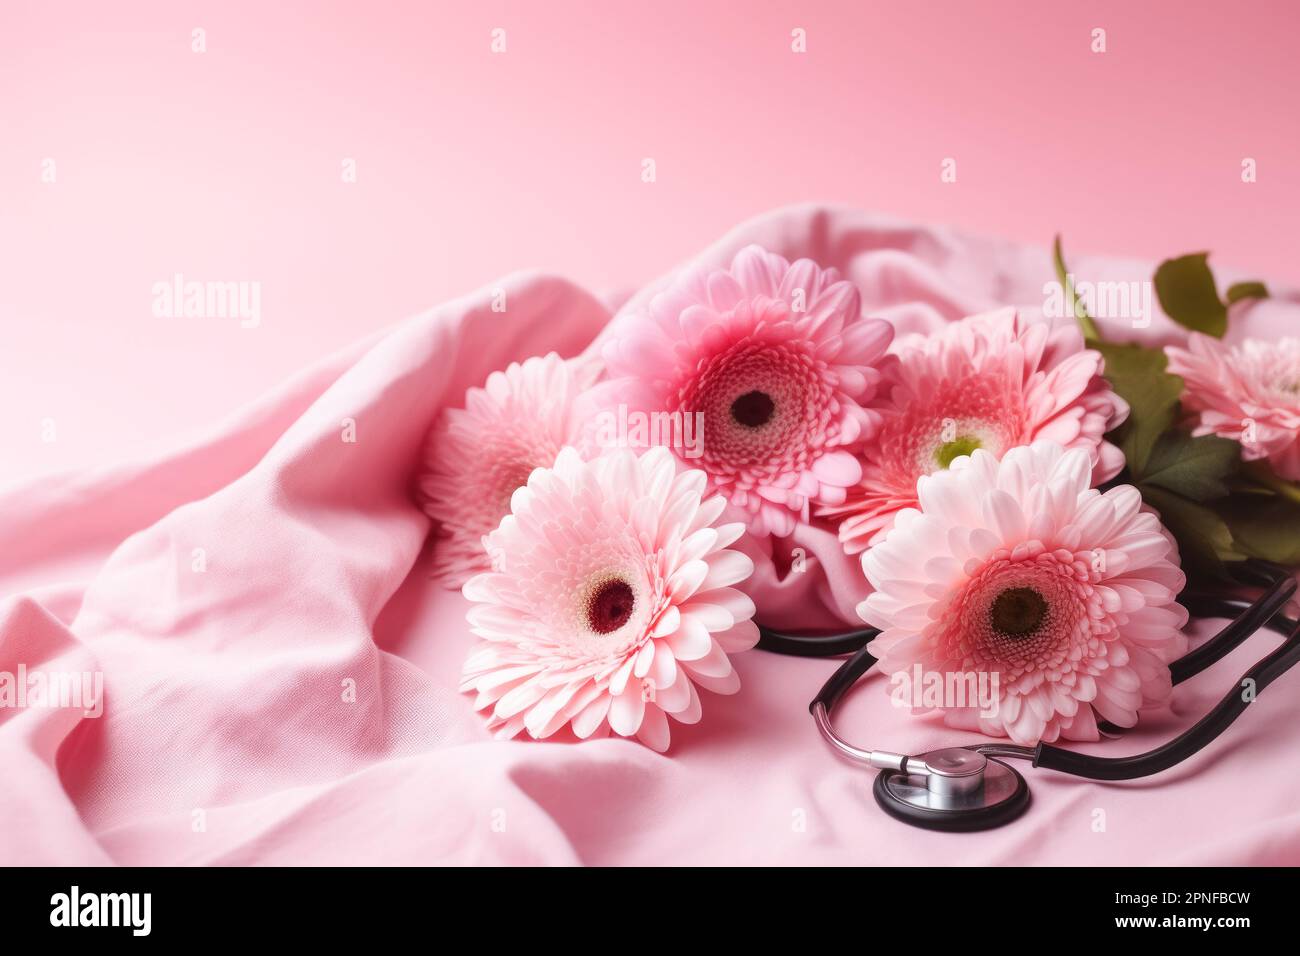 Cute bouquet of flowers, medical stethoscope, pink background. Festive composition for Doctor's Nurse's Day Stock Photo